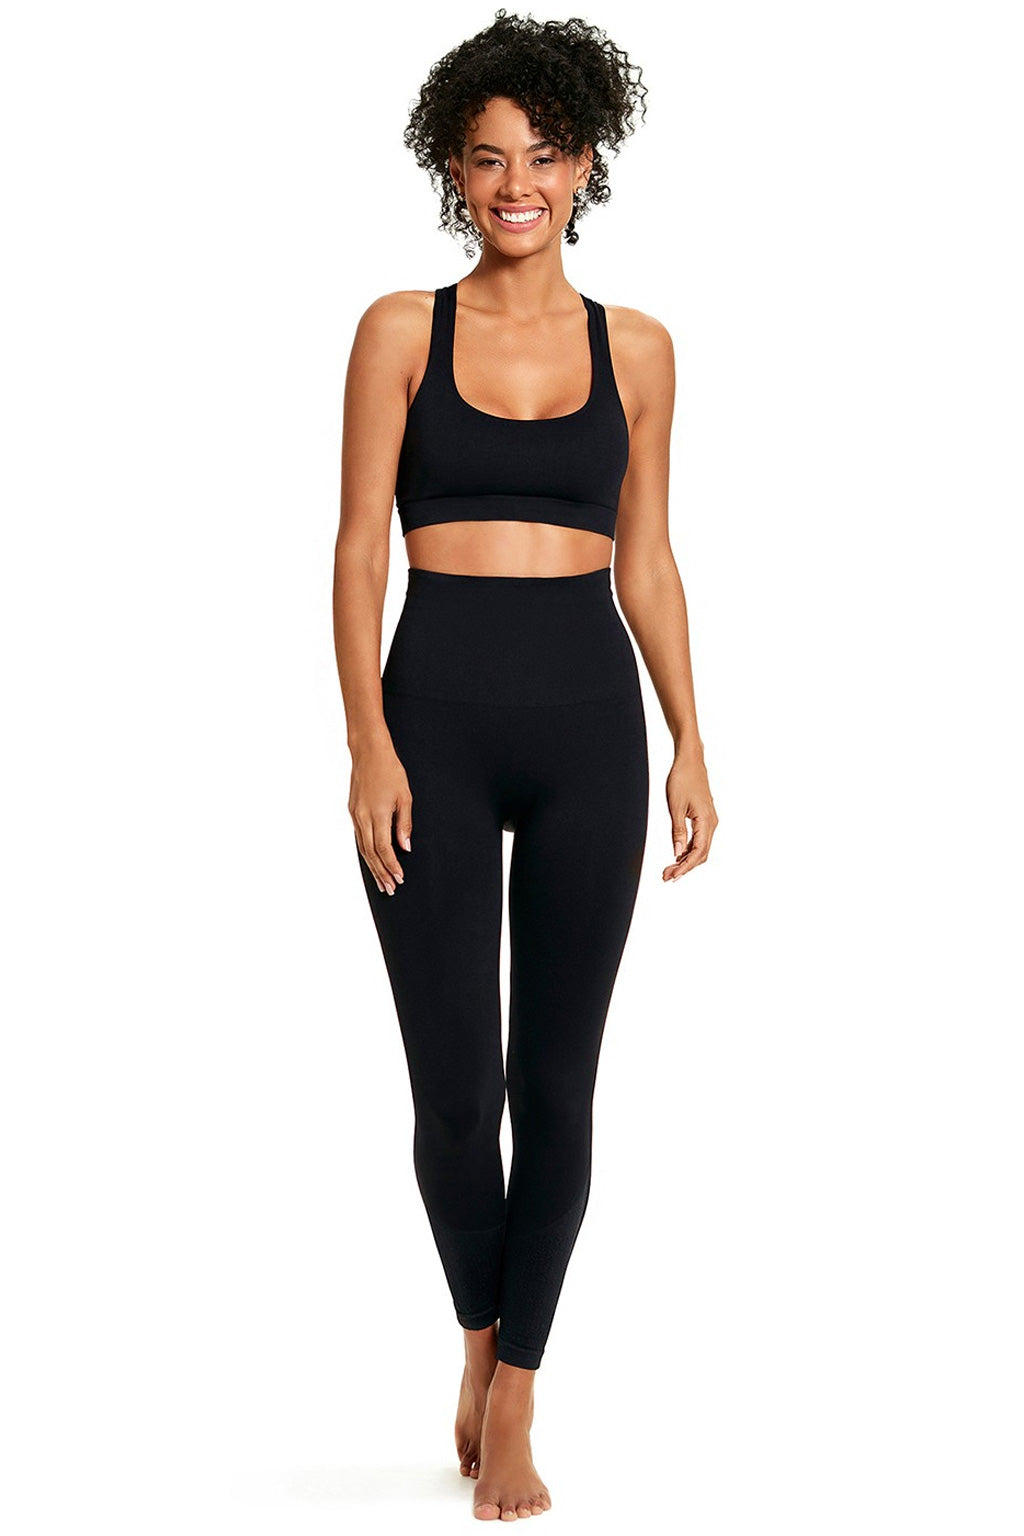 ACTIVEWEAR BRAZIL WORKOUT IN STYLE, SIZE U, SET OF (2)